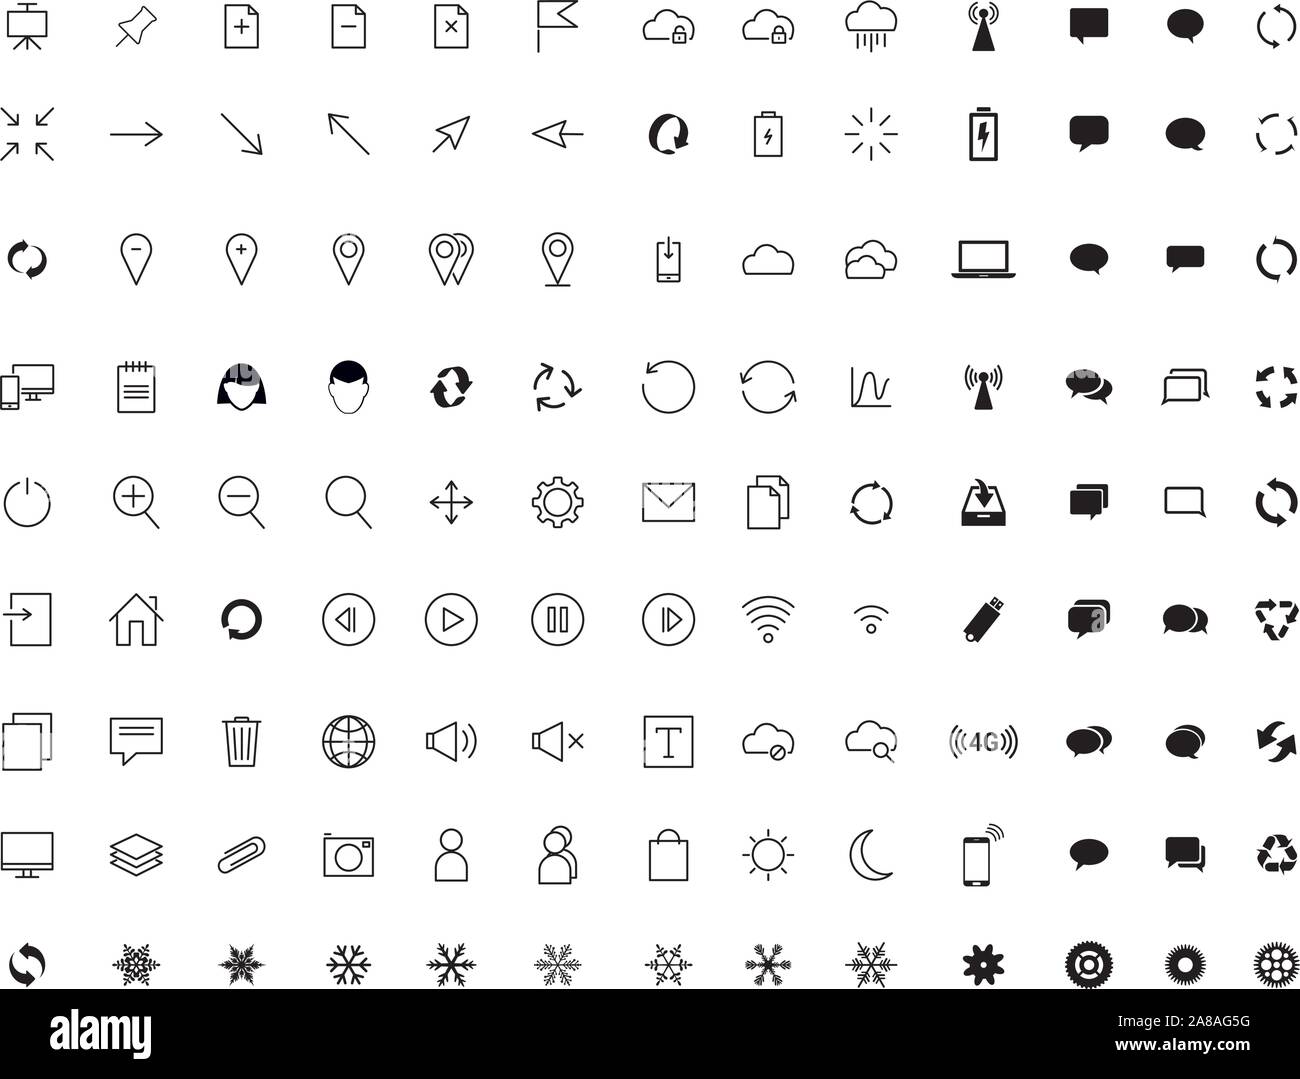 Vector collection of universal black flat icons for business, web, technology, communication, connectivity, music, media, finance, environment. Stock Vector